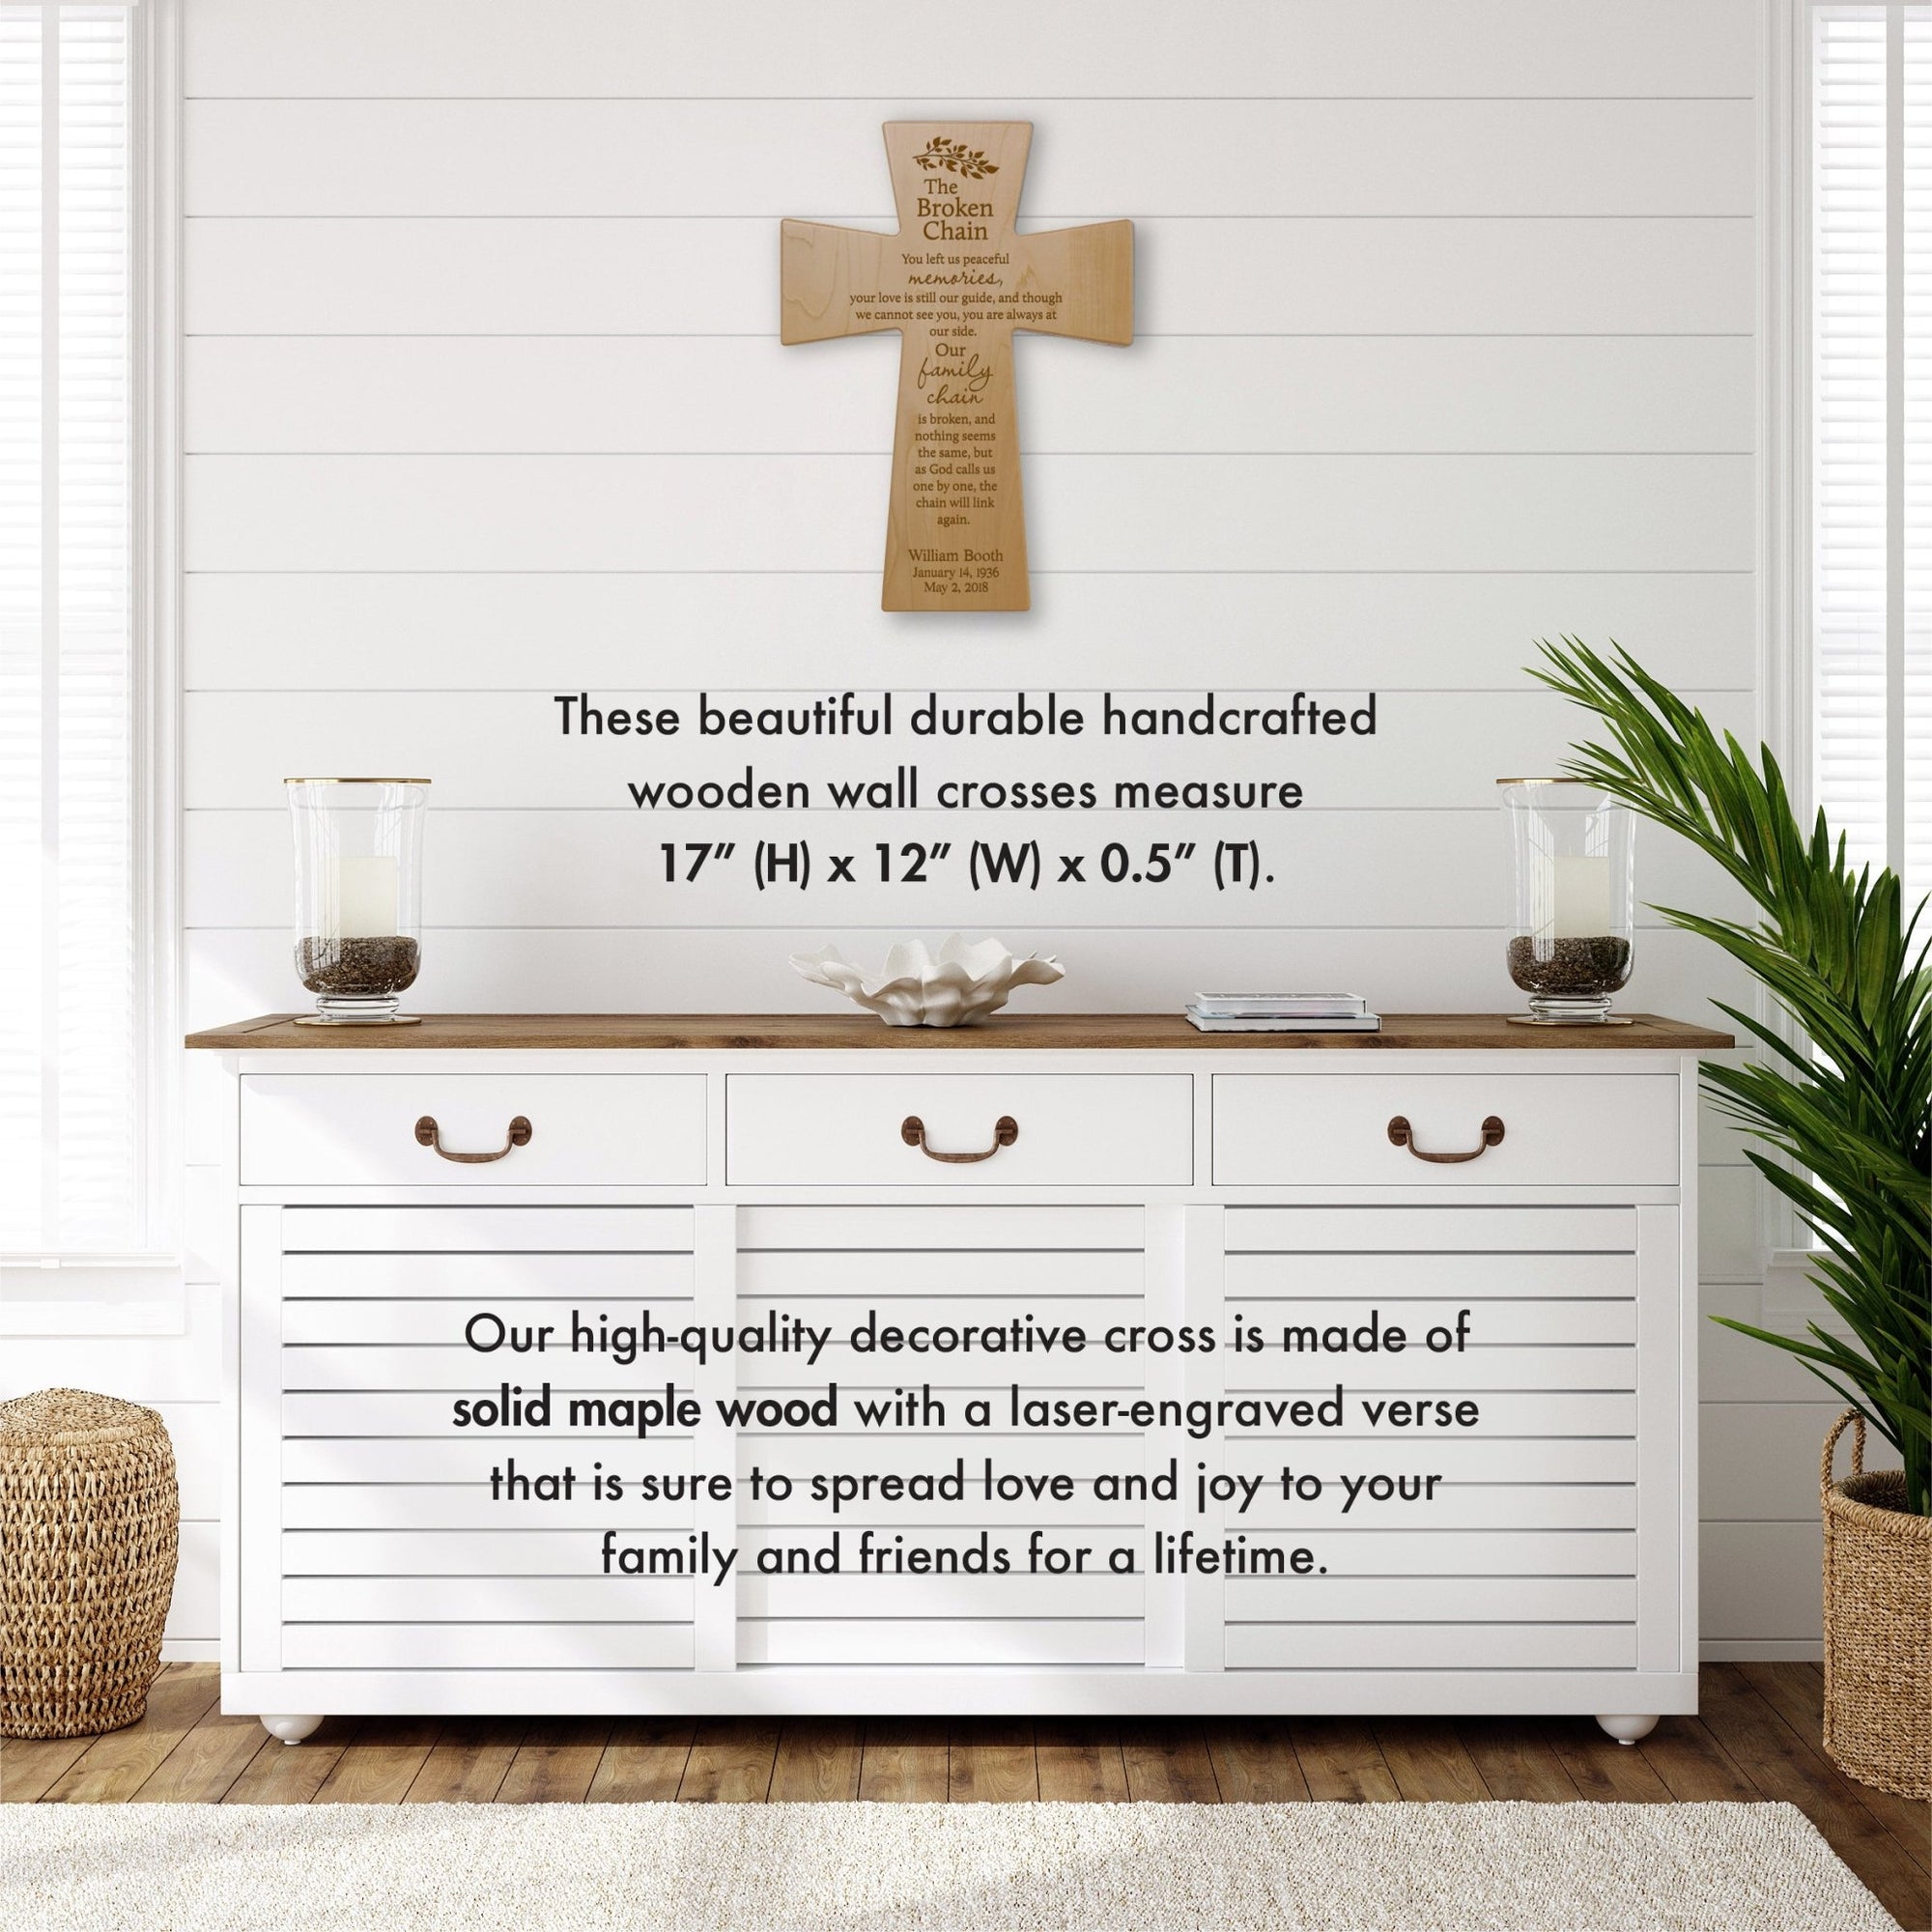 Personalized Memorial Wall Cross 12”x17”- The Broken Chain 2 - LifeSong Milestones